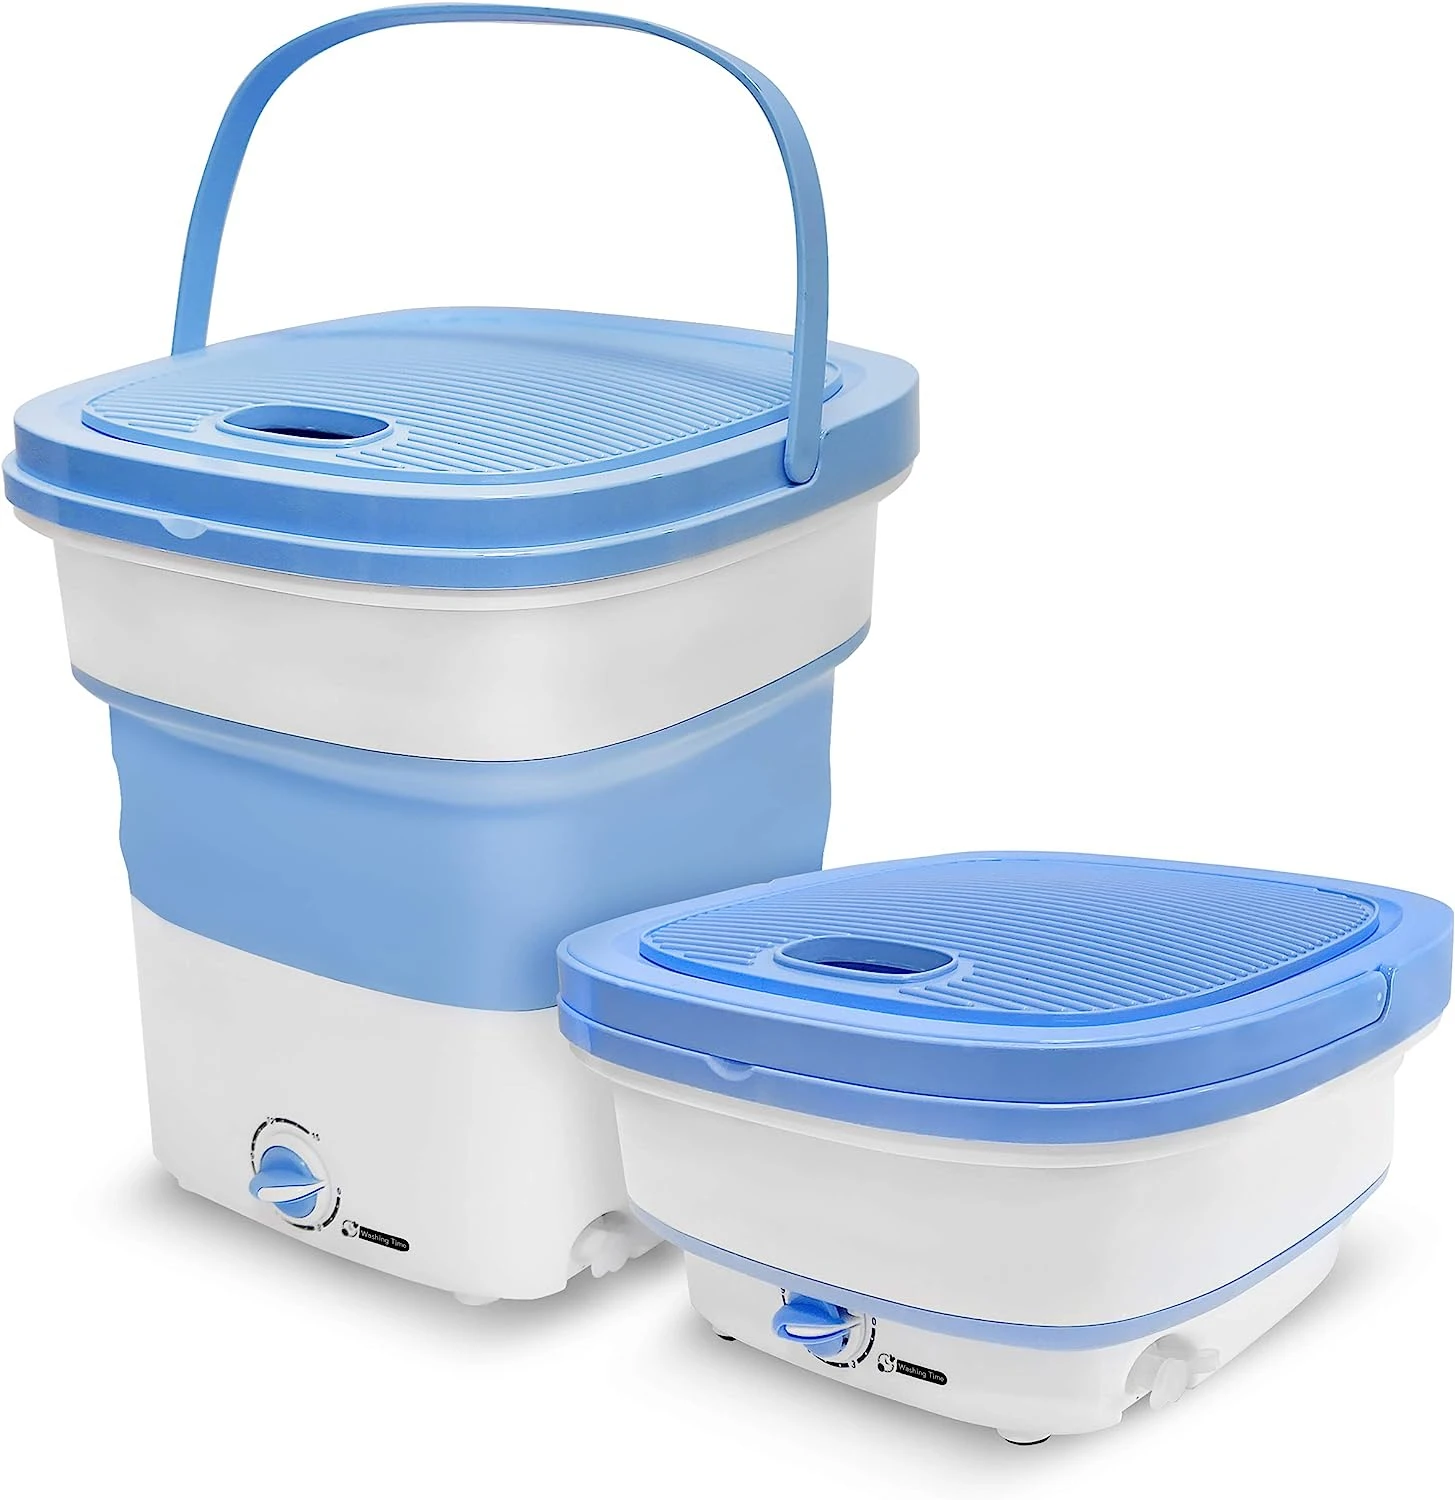 

Mini Washing Machine Lightweight Collapsible Bucket - Perfect for Camping, Travelling, Apartment, Dorm USA Brand - PUCWM33.5, l